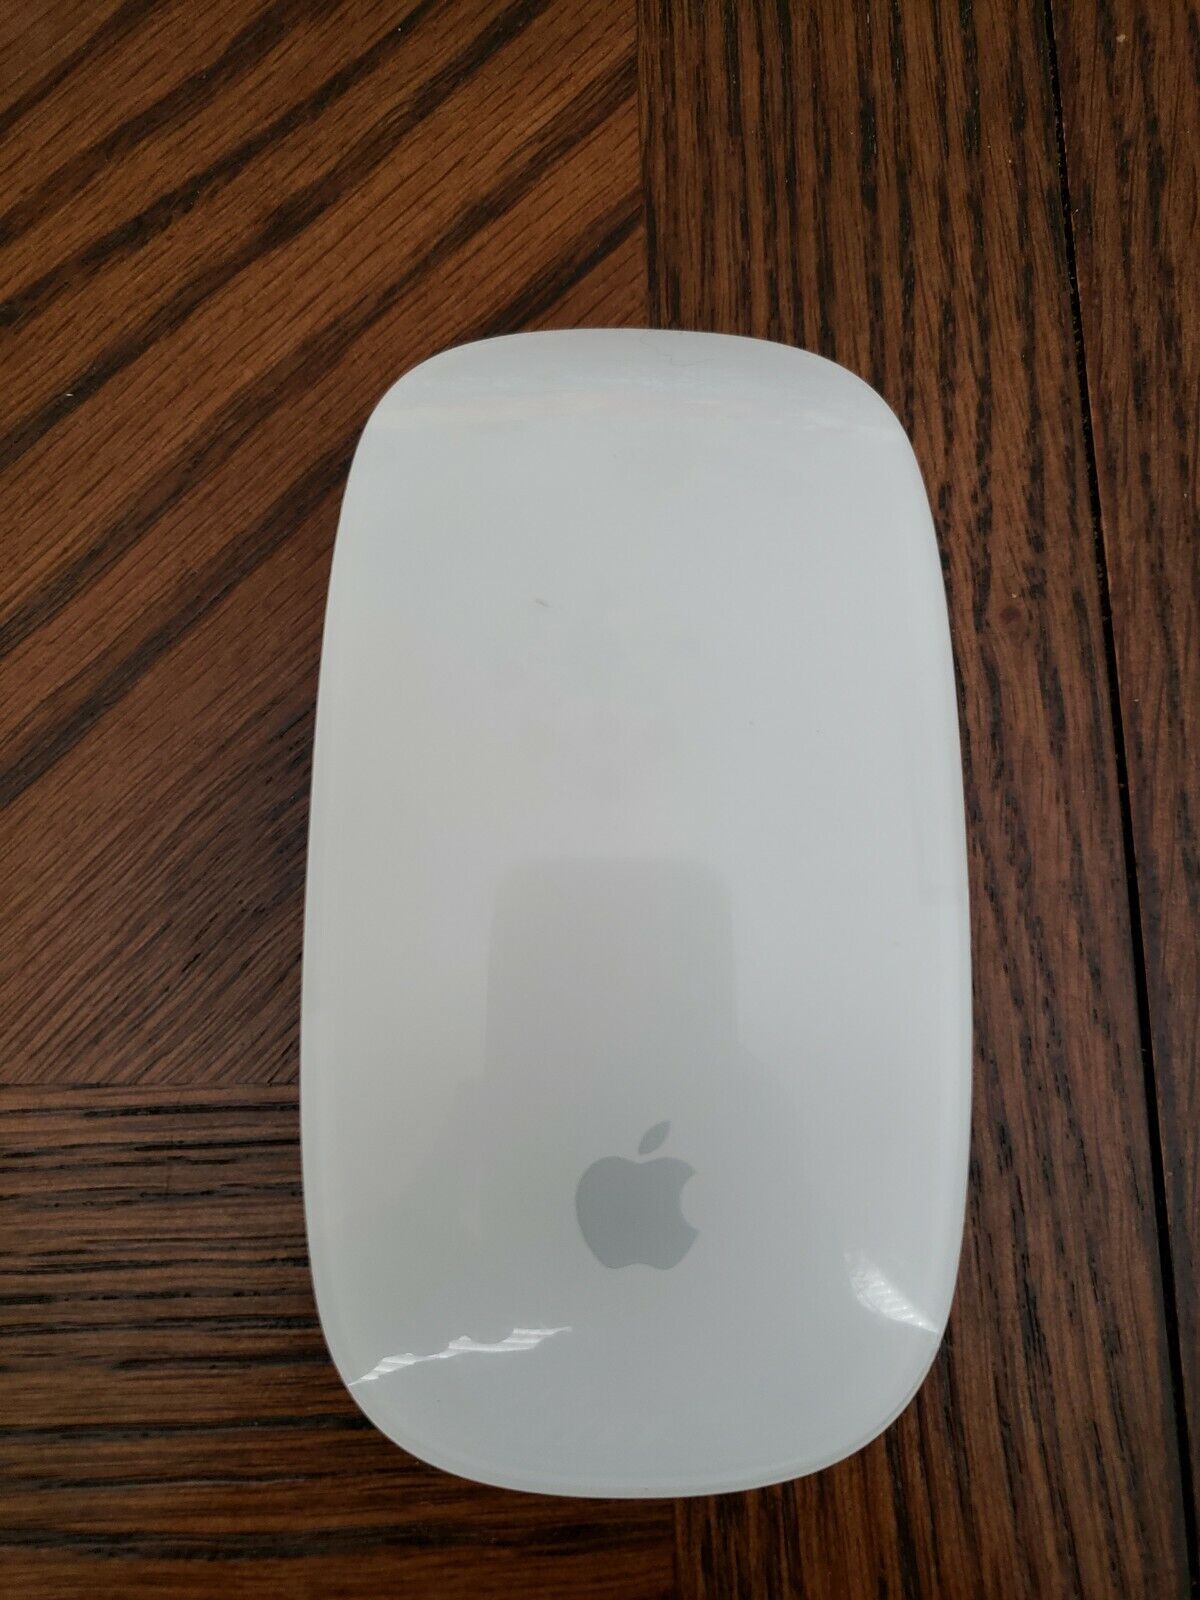 OEM Apple Mouse Bluetooth Magic Mouse Wireless Model A1296 3VDC Great Used Cond.